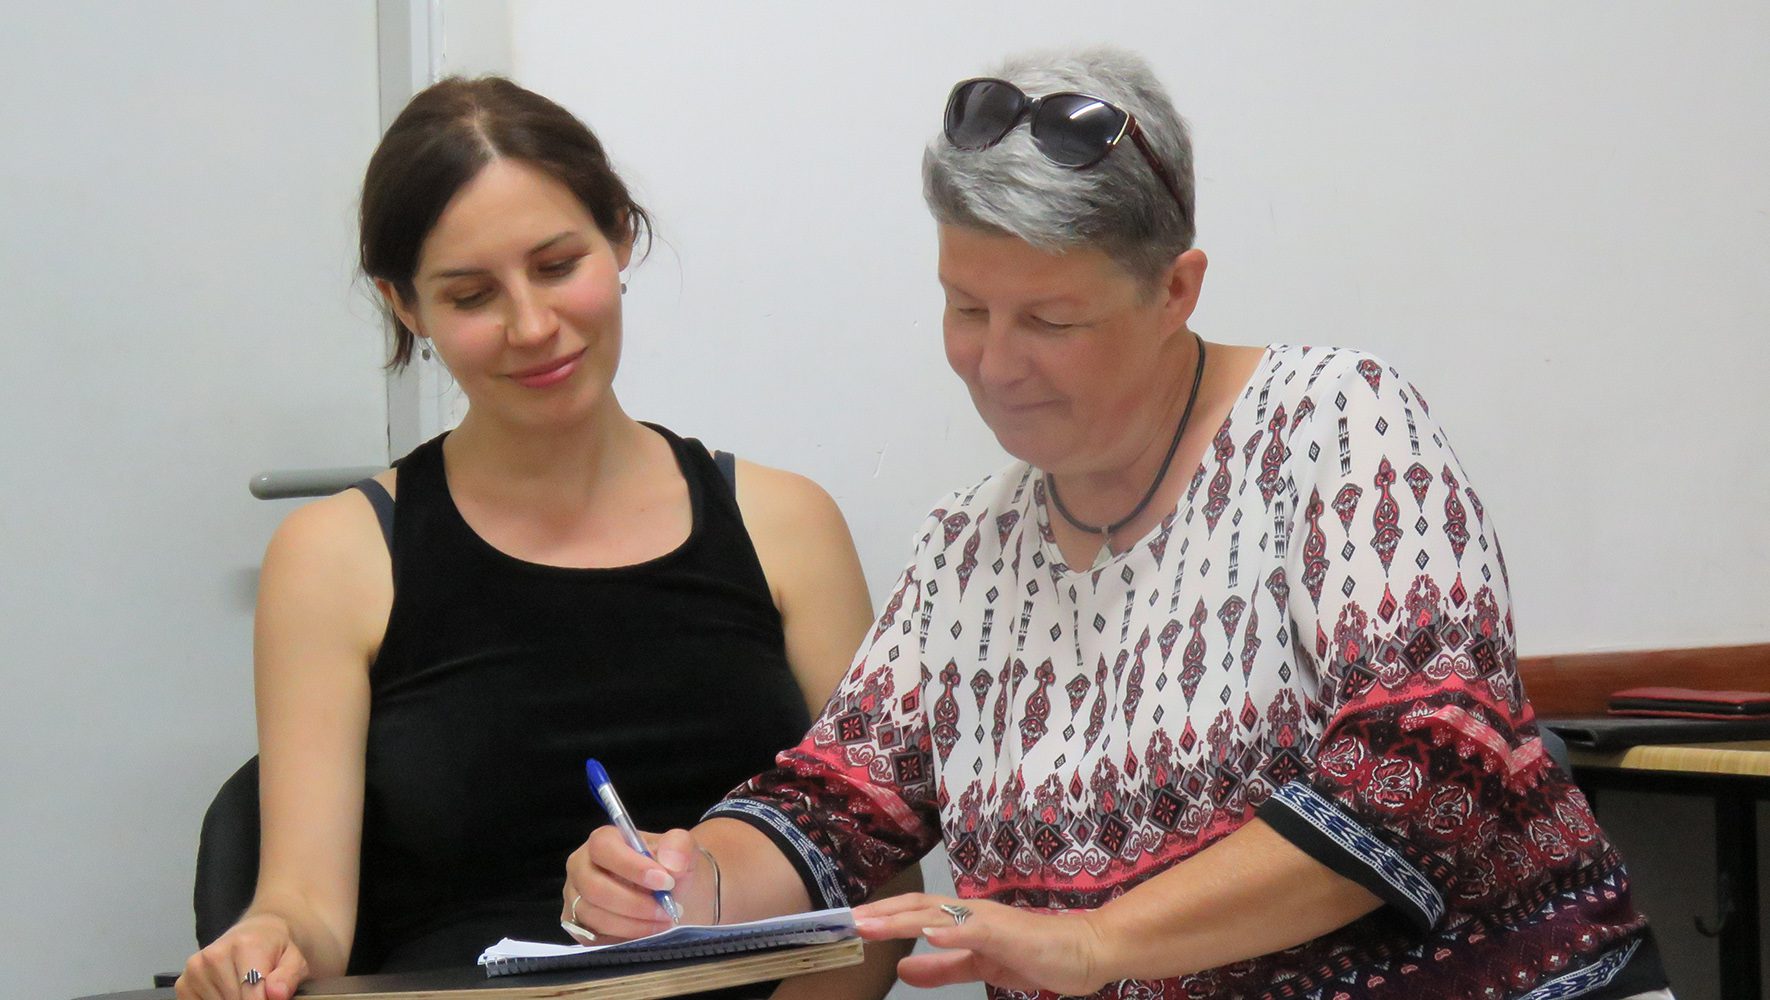 Israeli woman smiles as Ukrainian woman sits next to her and leans over to write something on a small desk